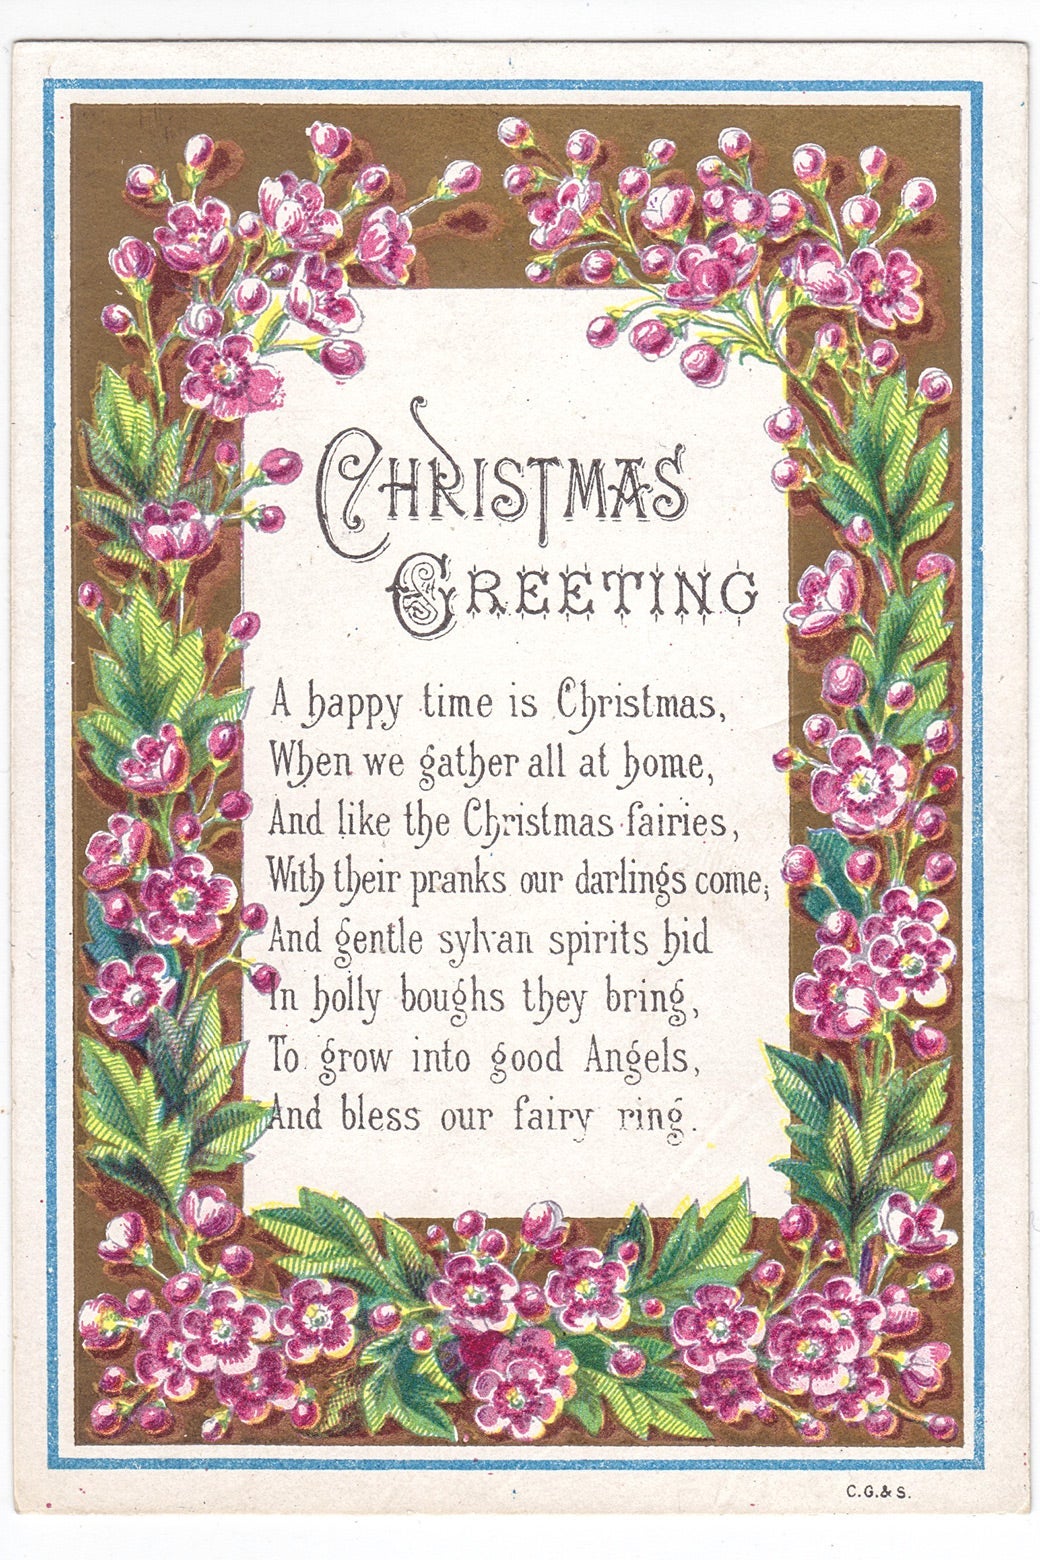 A poem titled "Christmas Greeting" on a card with a flower border